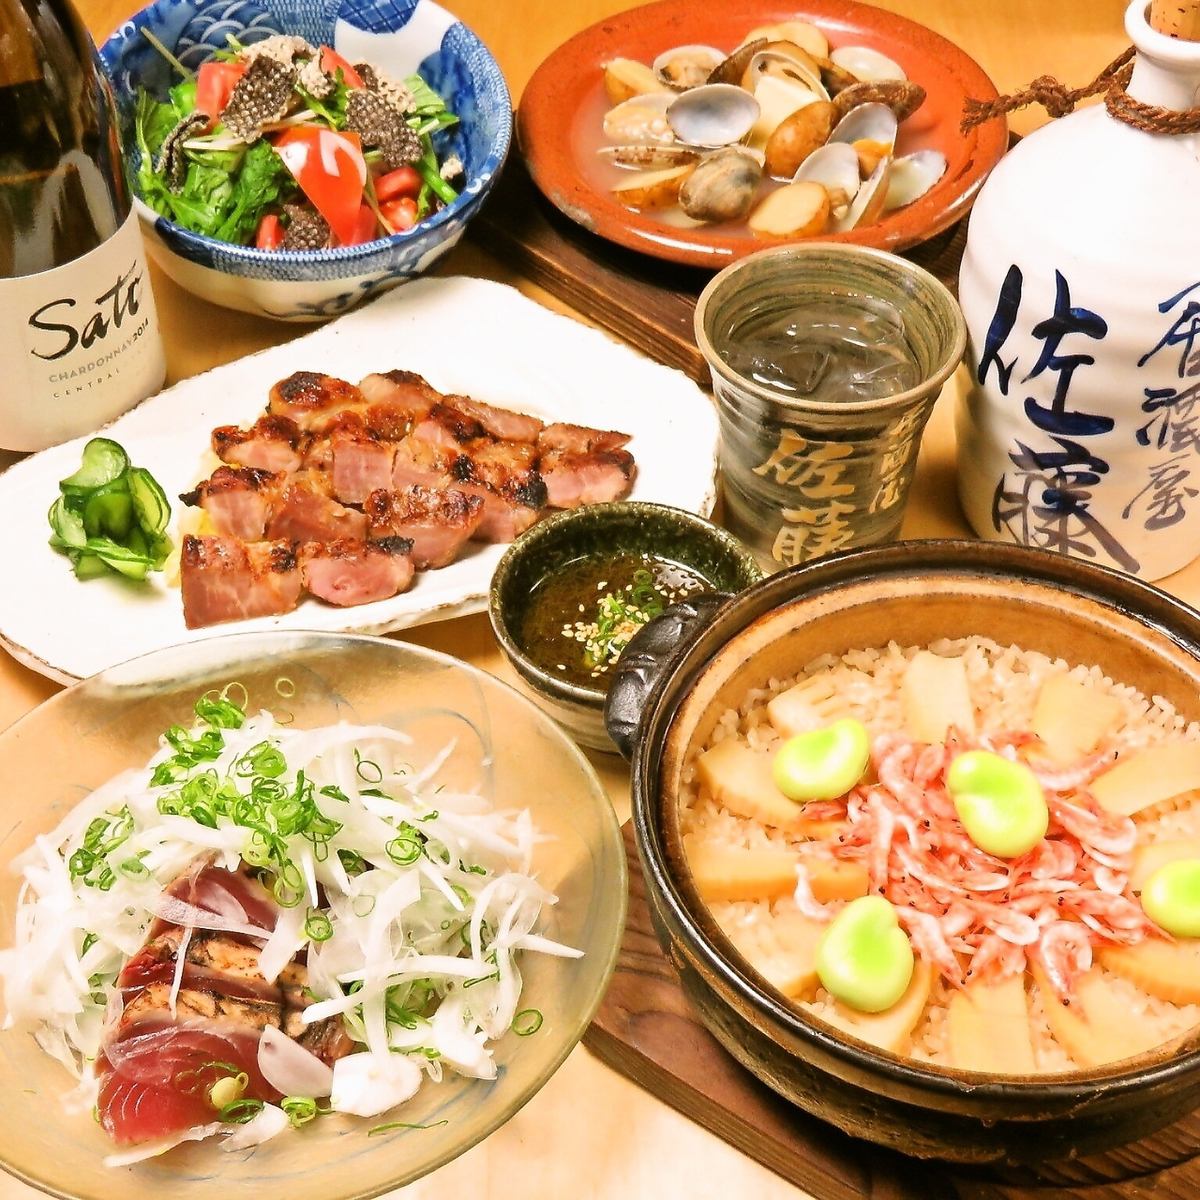 "Izakaya Sato" where you can enjoy fresh seafood, charcoal-grilled food and sake, 2-hour all-you-can-drink course starts from 6,000 yen